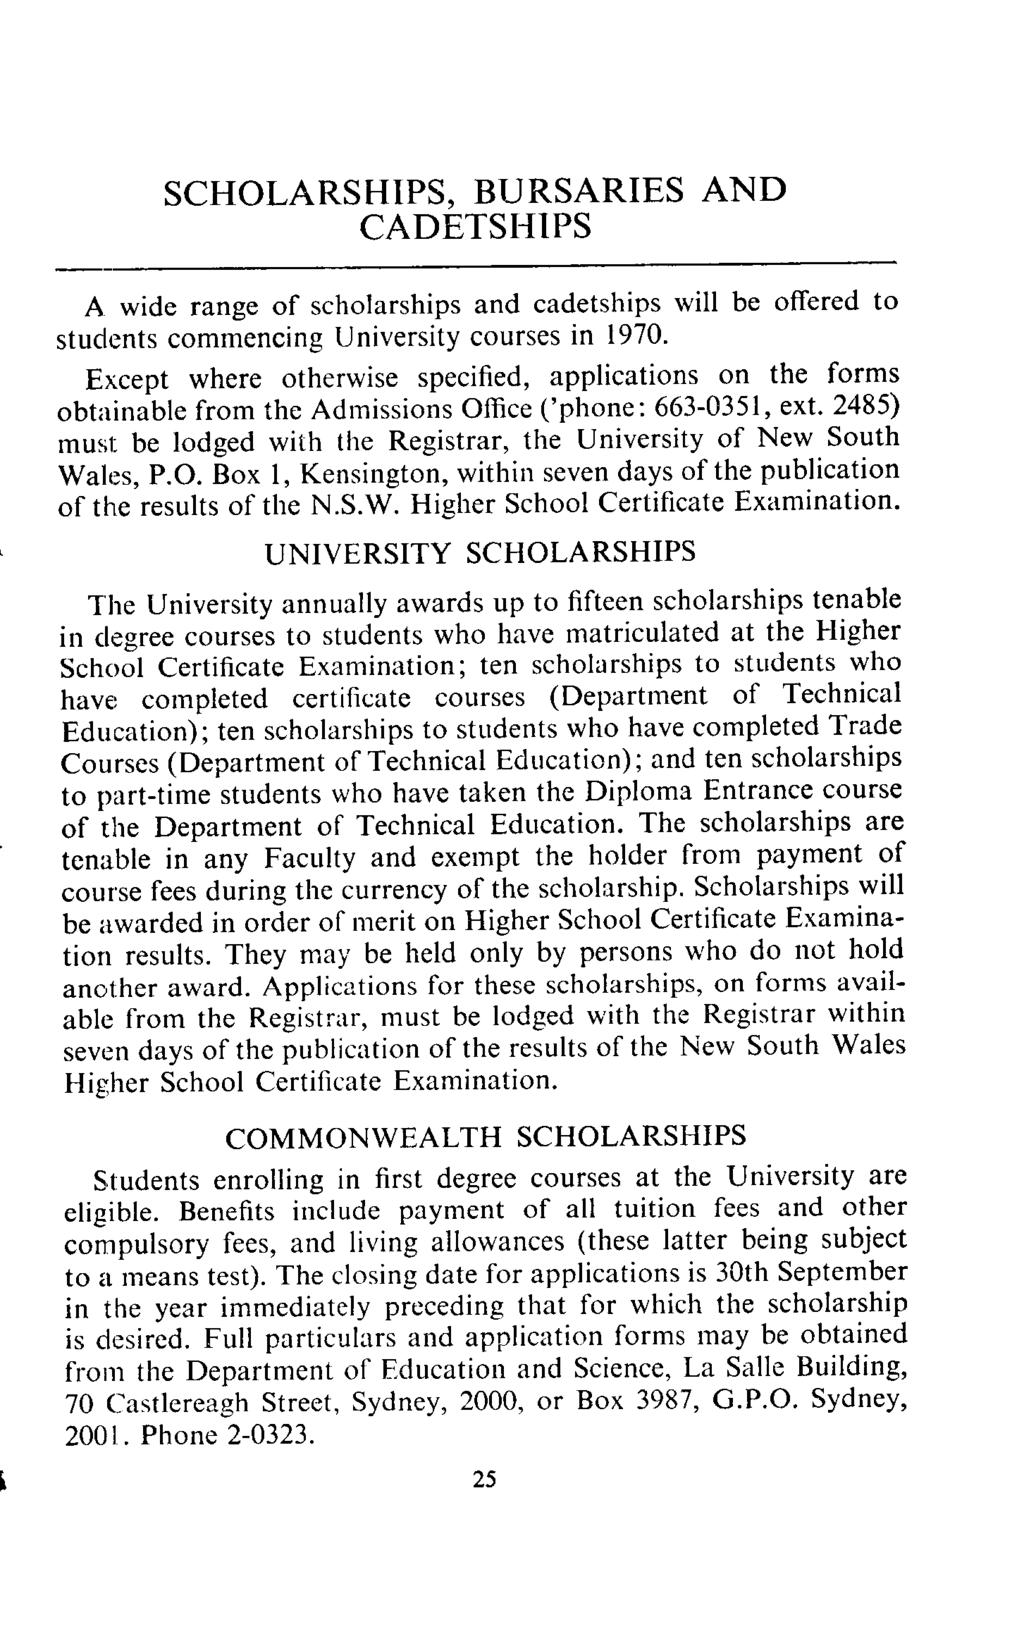 SCHOLARSHIPS, BURSARIES AND CADETSHIPS A wide range of scholarships and cadetships will be offered to students commencing University courses in 1970.